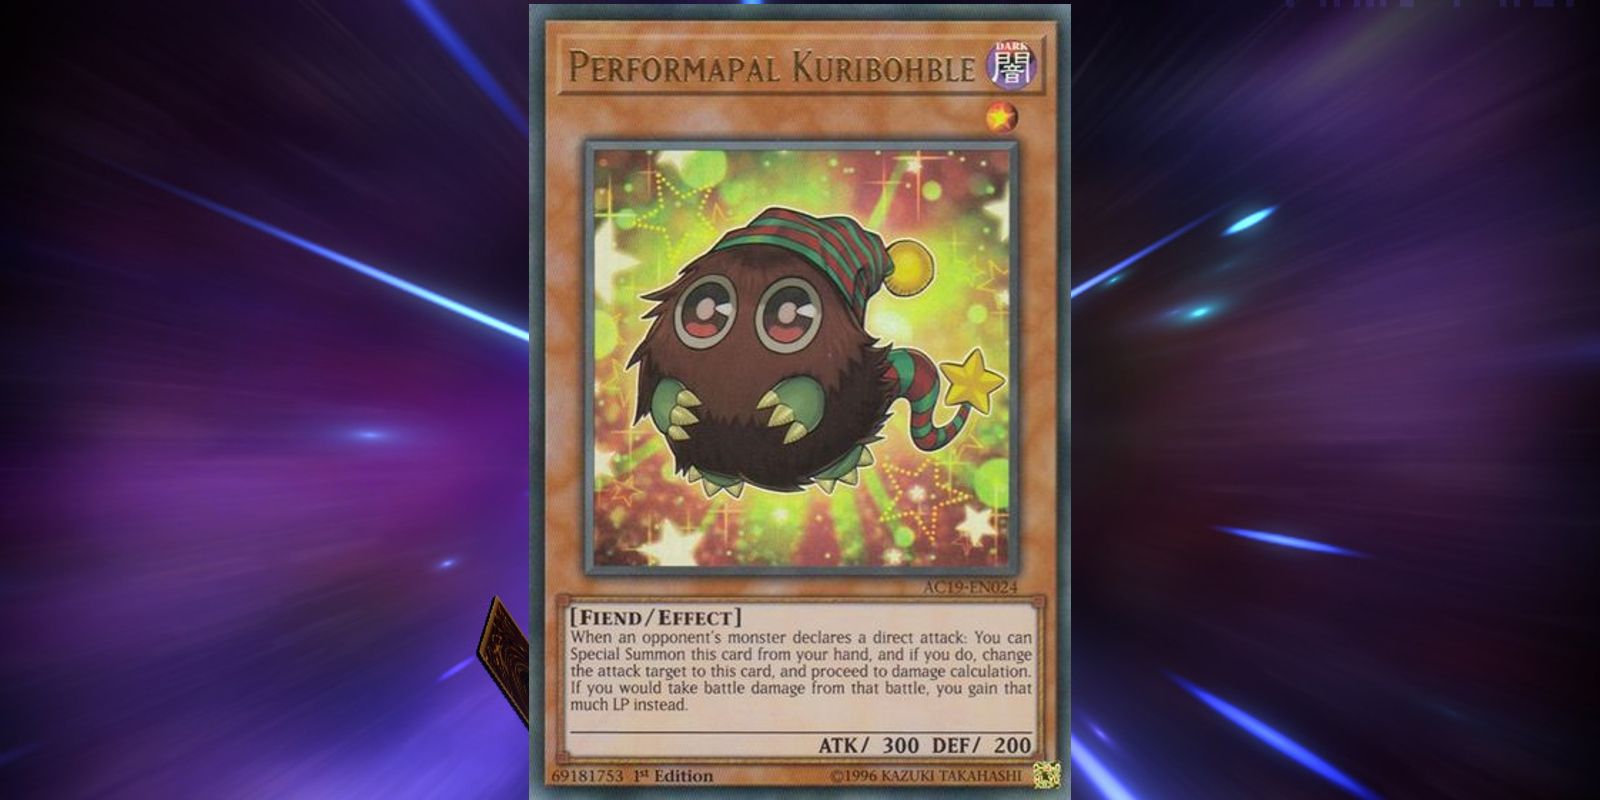 Performapal Kuriboh lets players gain Life Points in Yu-Gi-Oh! Master Duel.